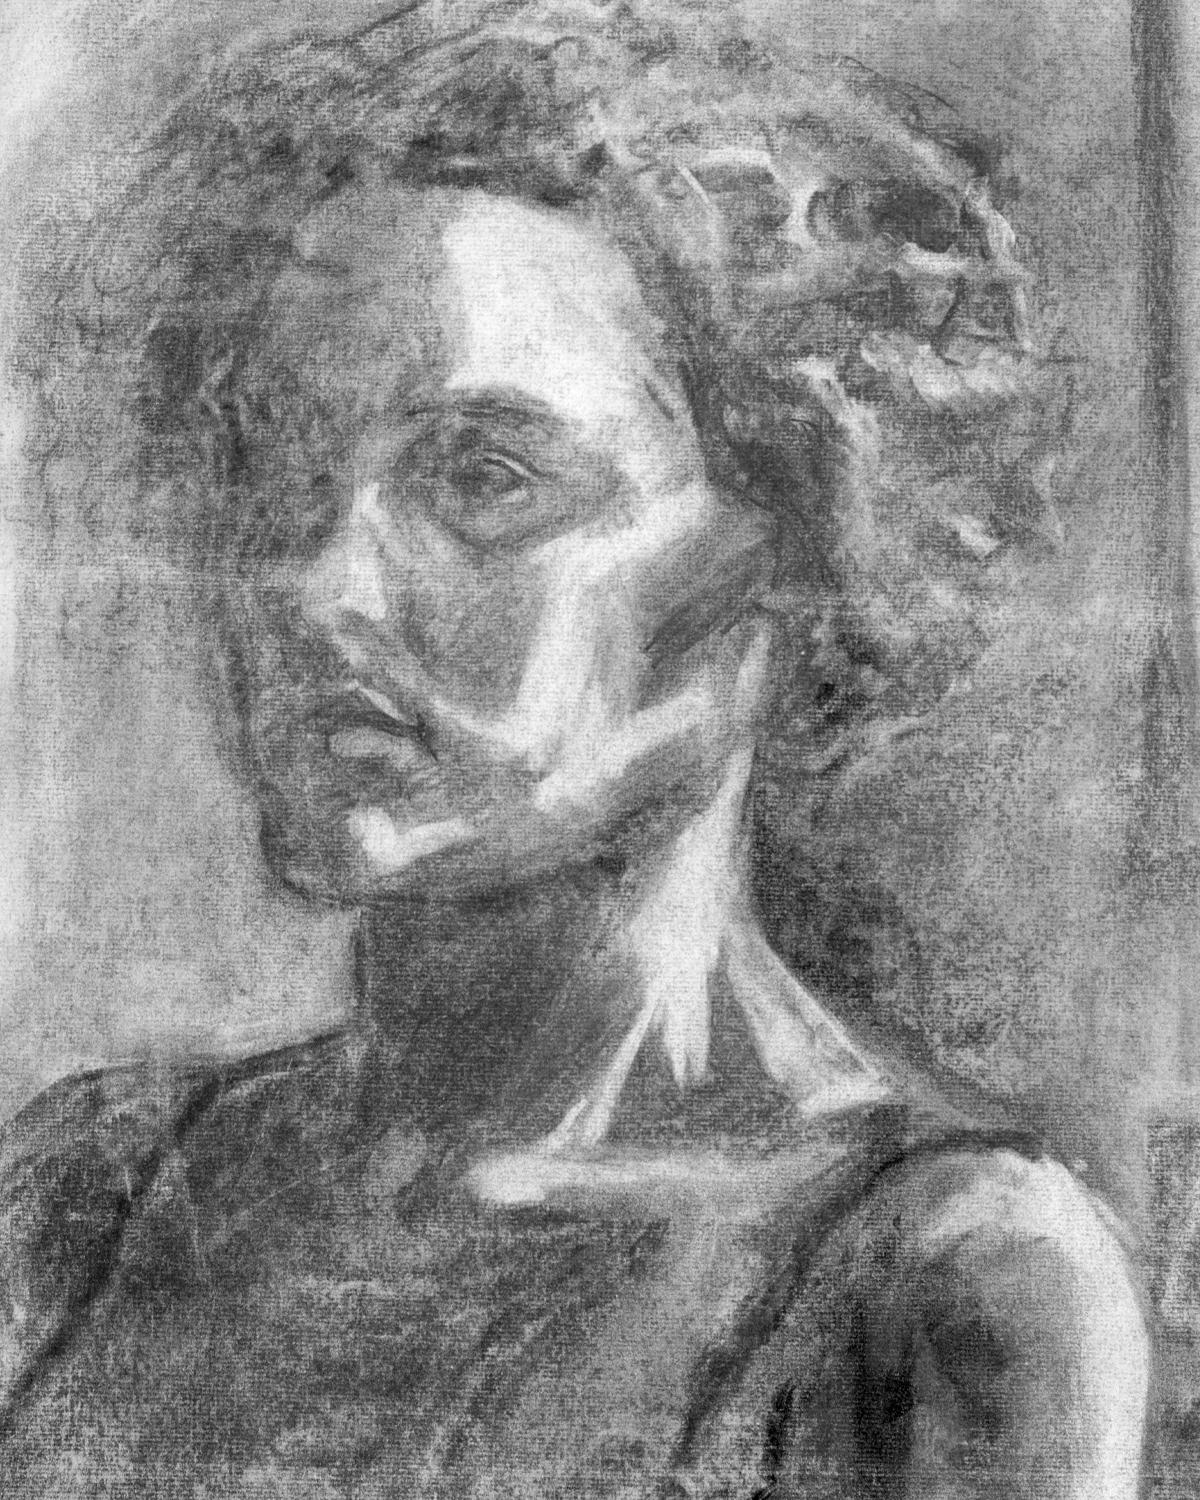 Vintage charcoal portrait of a woman on paper newly framed with a wire at back for hanging. We found an assortment of charcoal drawings on paper at an antiques show. All pieces are drawn by an unknown artist that explores various aspects of form,